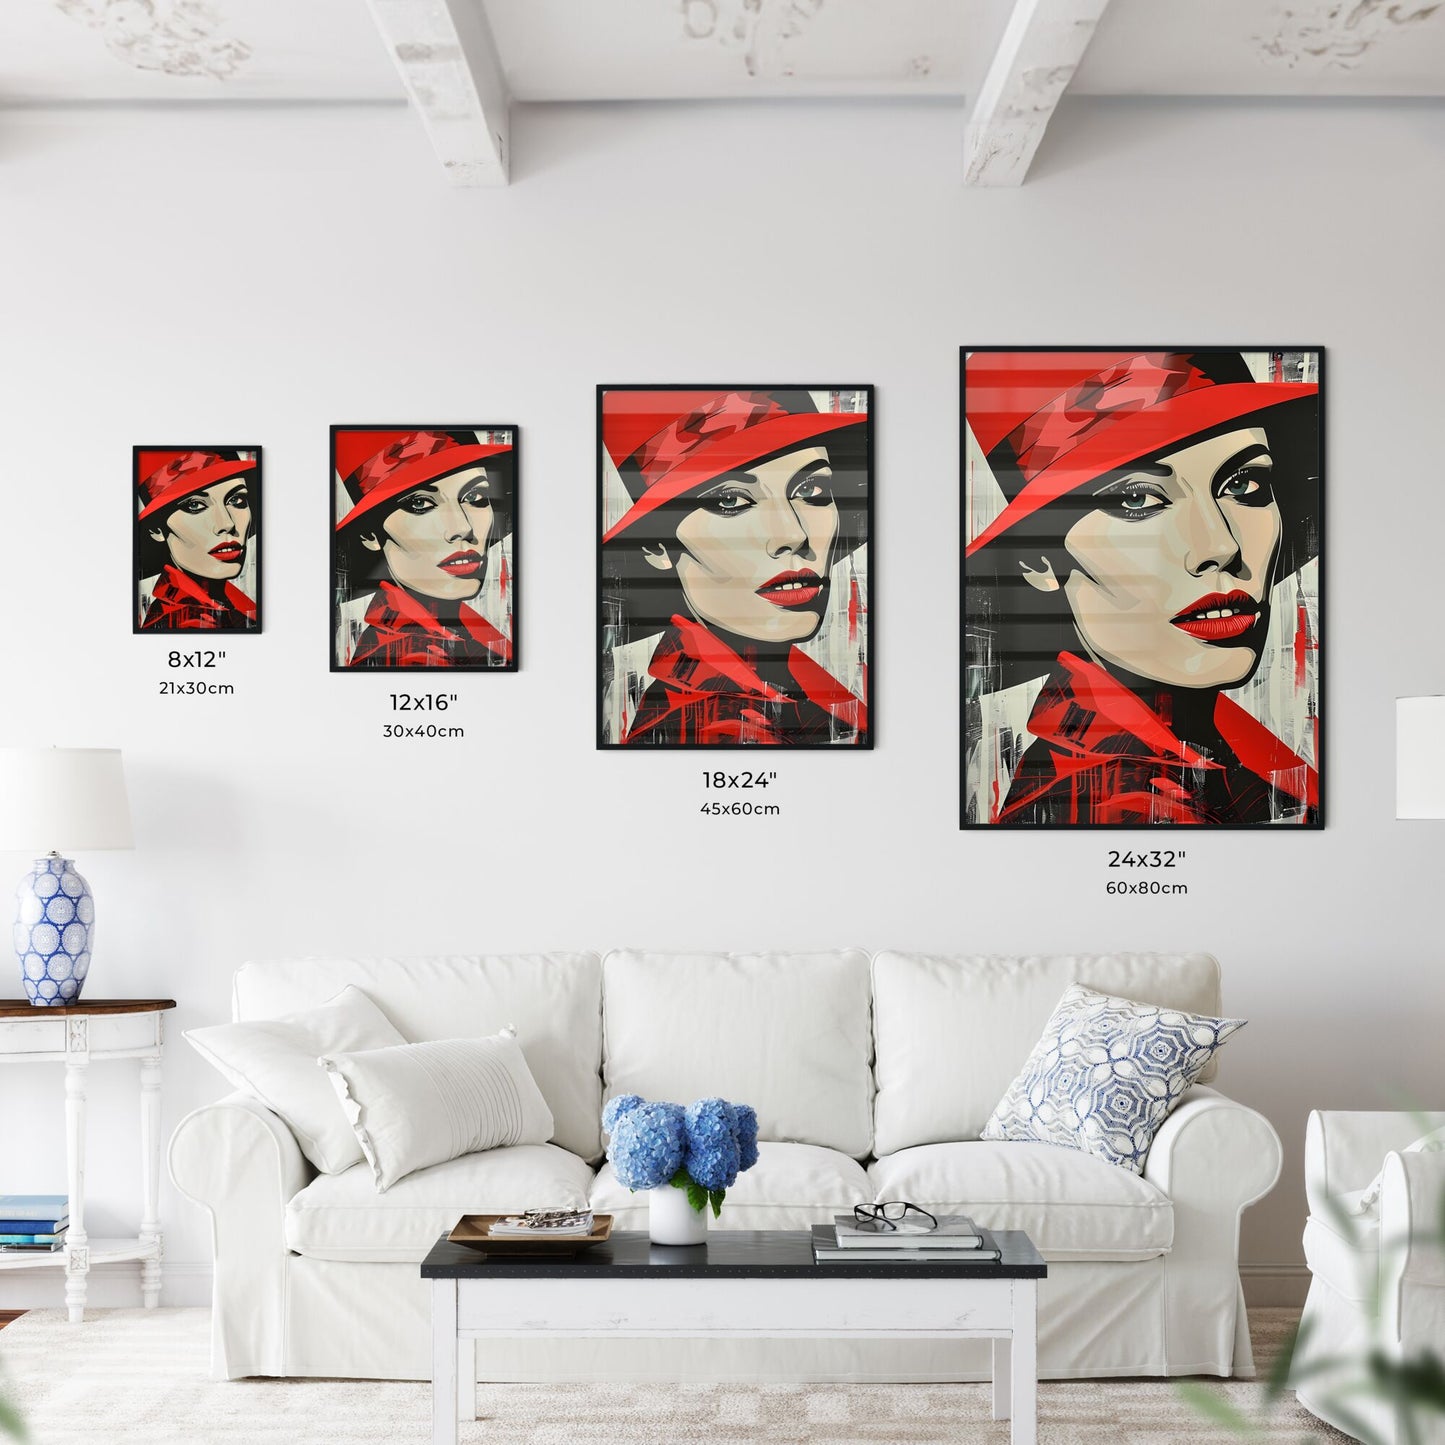 Captivating Pop Art Silkscreen Portrait: Woman in Red Hat & Flags by Frankie Pearce, Vibrant & Artistic Stock Image. Default Title